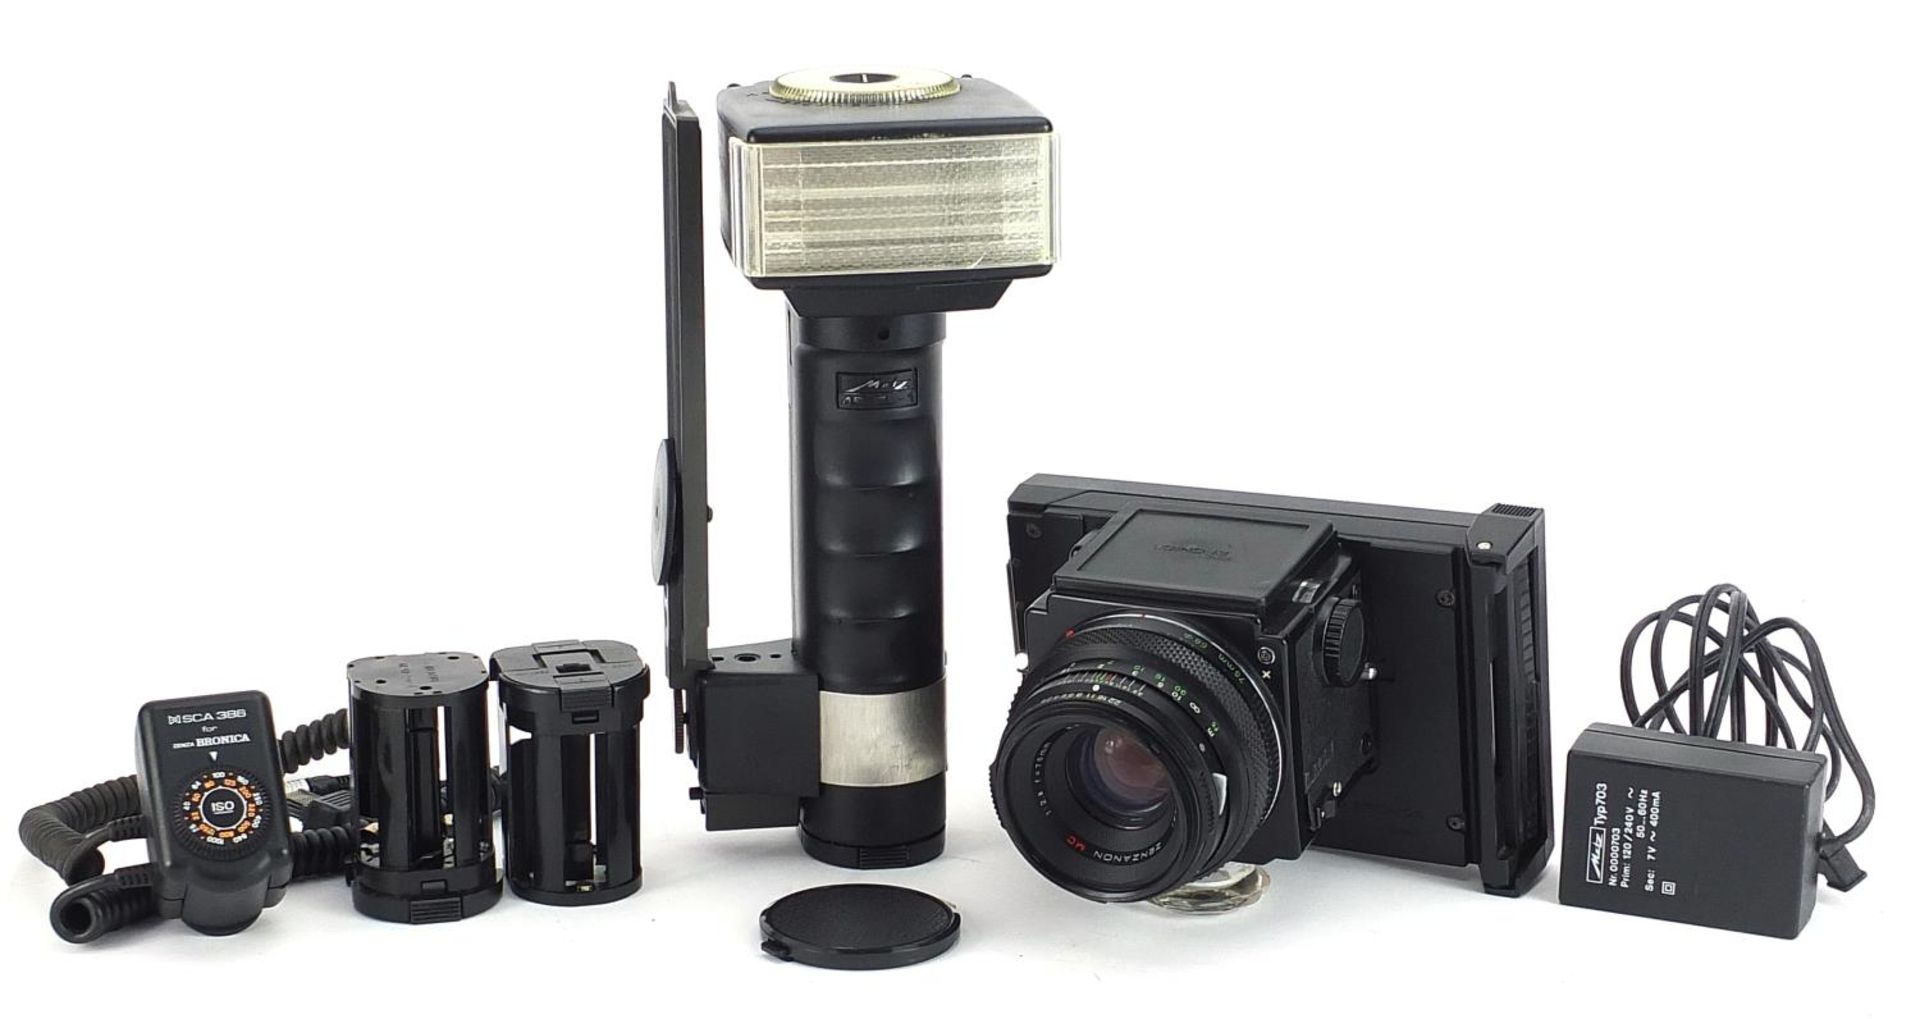 Zenza Bronica ETRS film camera with a Metz flash unit